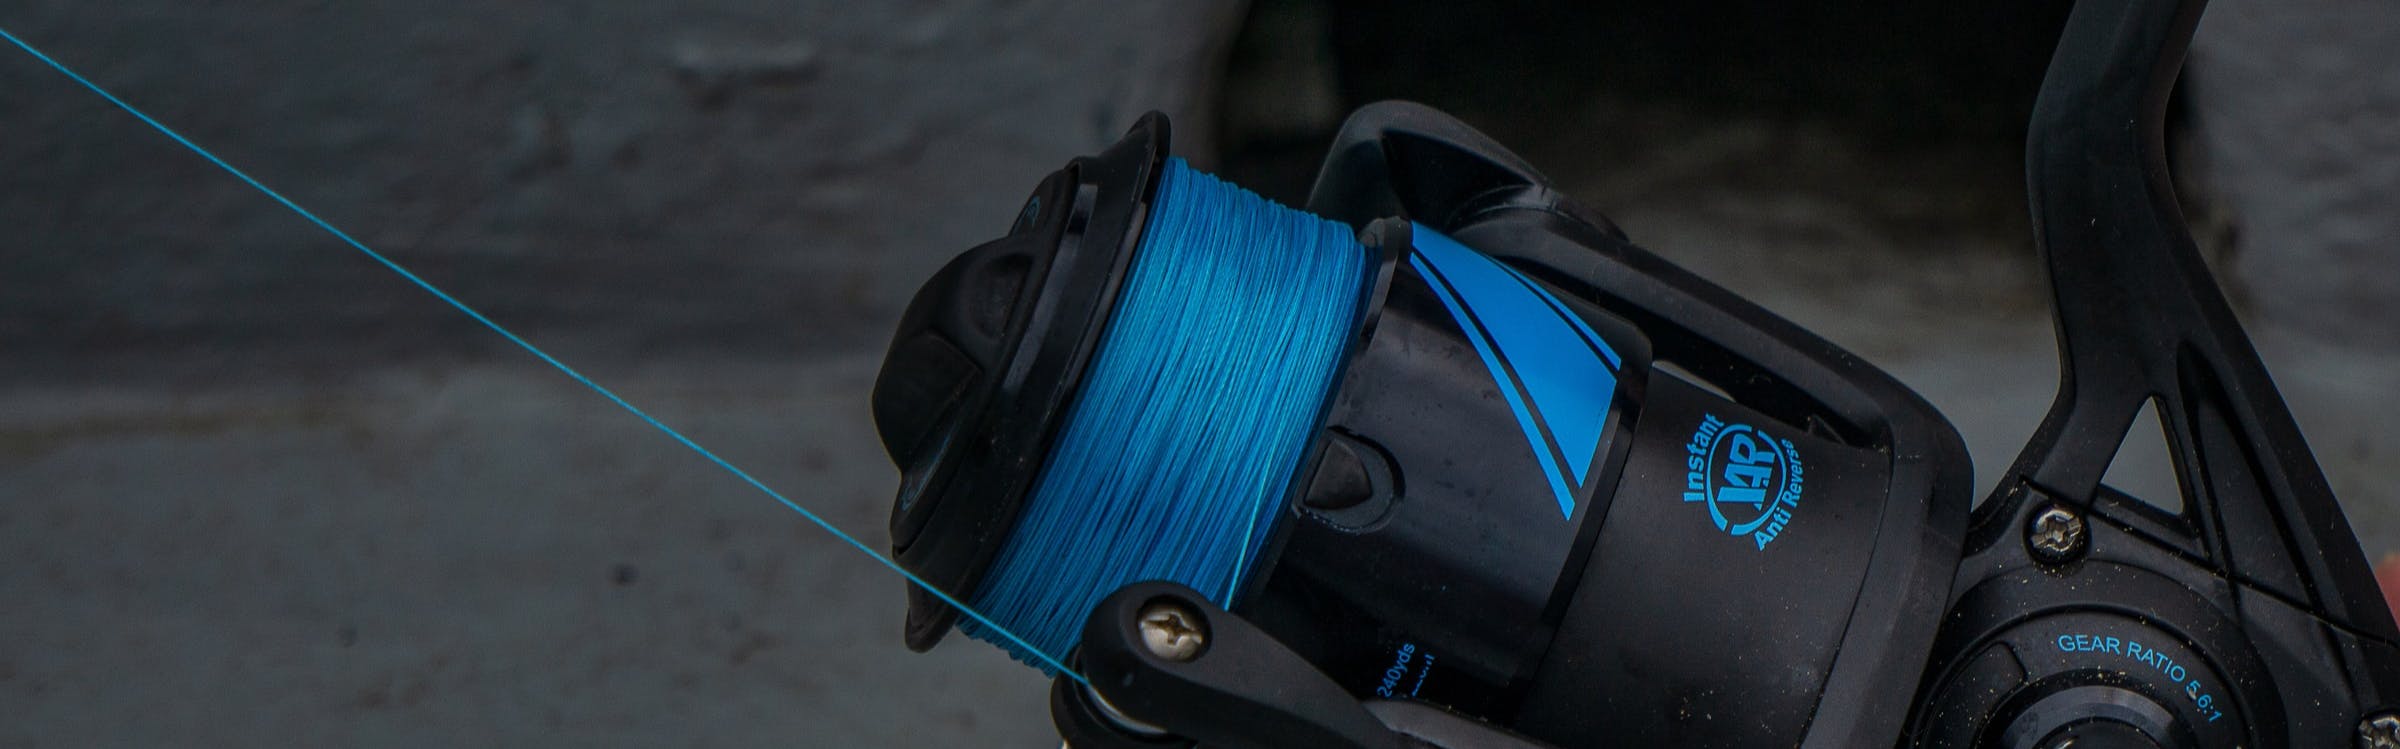 Blue fishing line being unspooled from a black reel.